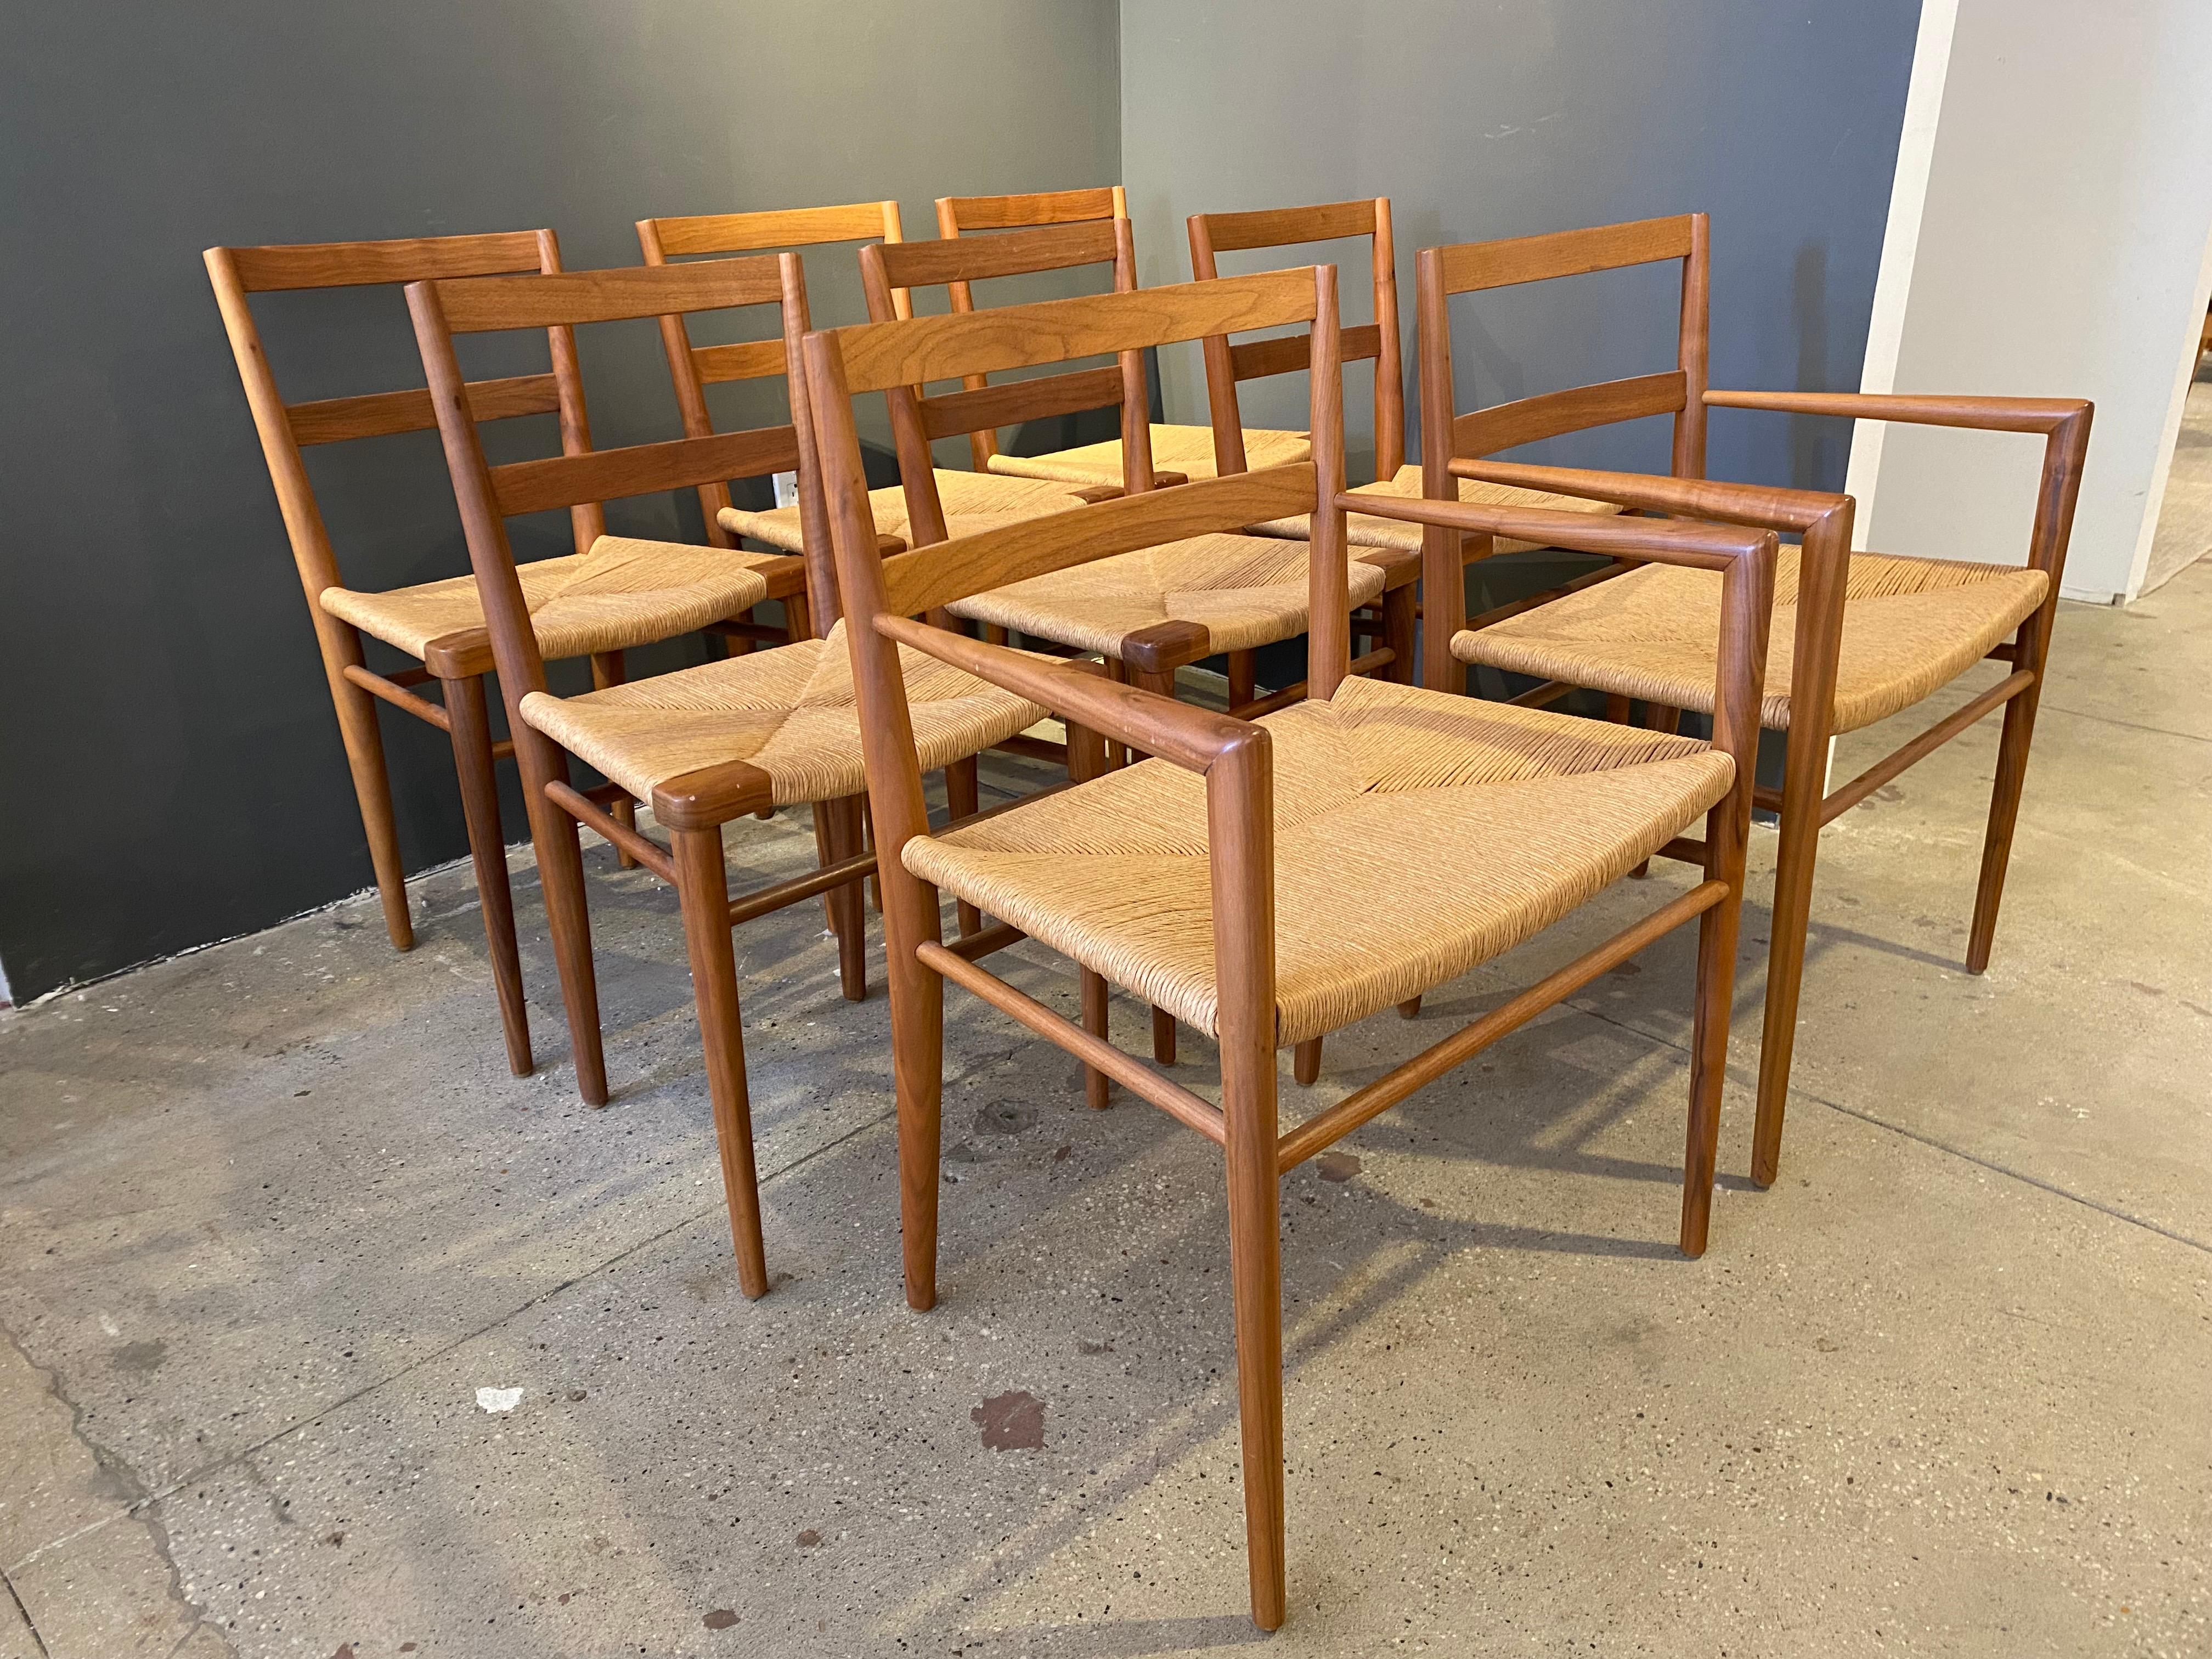 Originally designed by Mel Smilow in 1956 and officially reintroduced by his daughter Judy Smilow in 2013, the Rush Collection is classically mid-century. This collection’s handwoven seating and handcrafted wooden frame provide a comfortable and